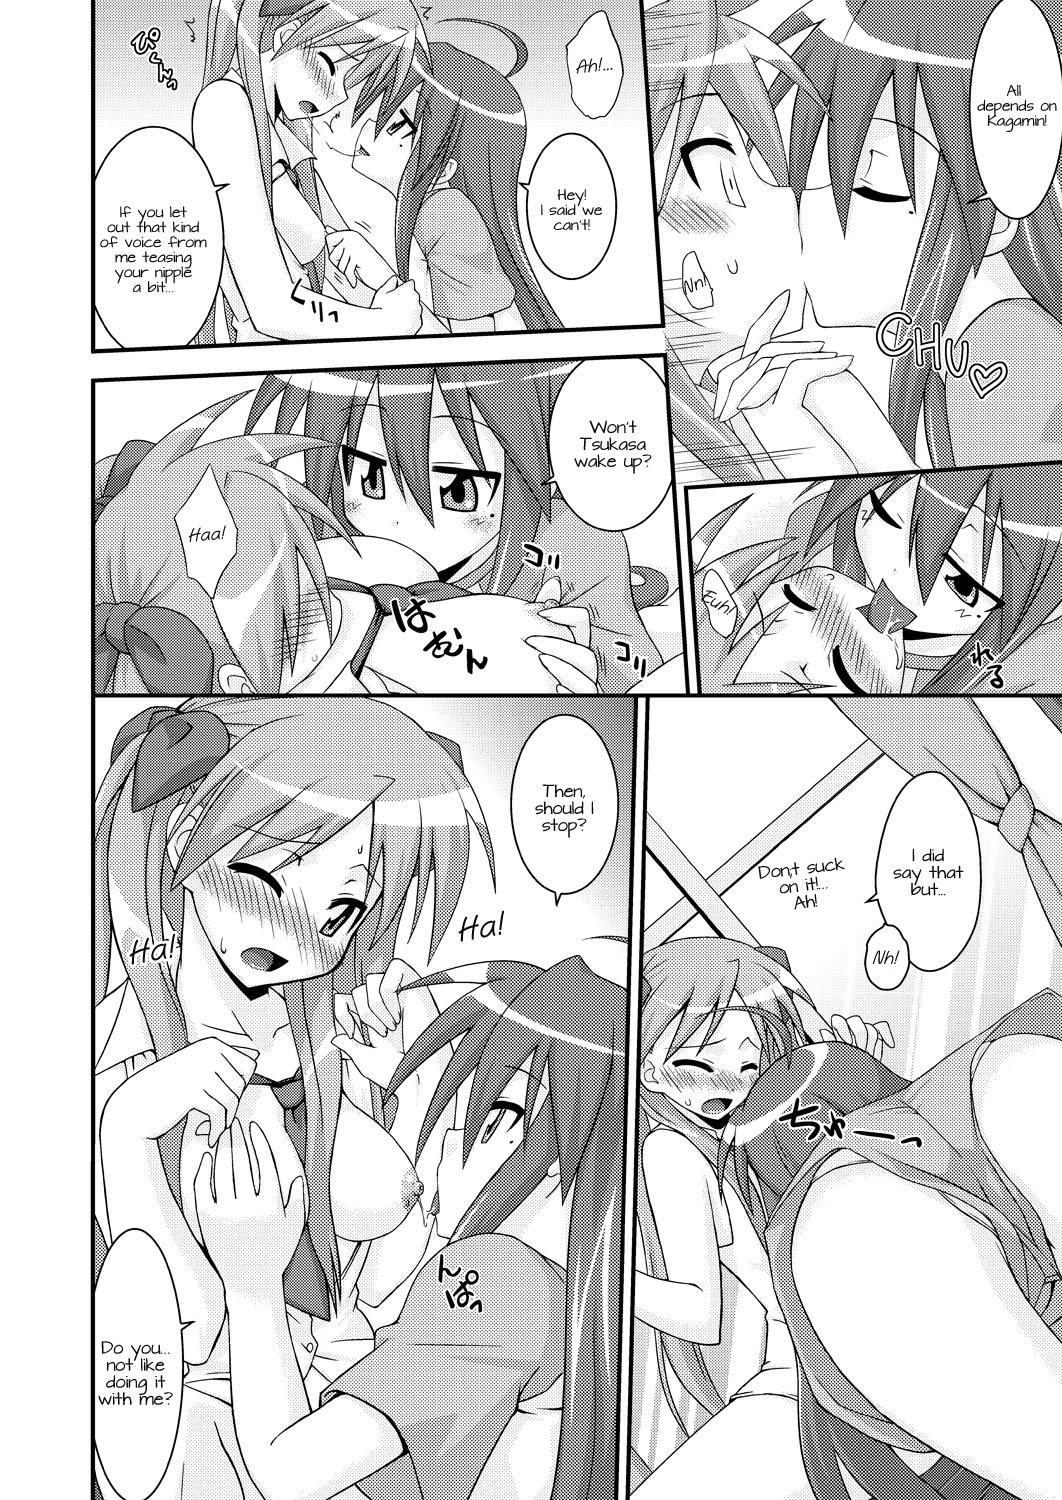 From Jam Star - Lucky star Mojada - Page 5